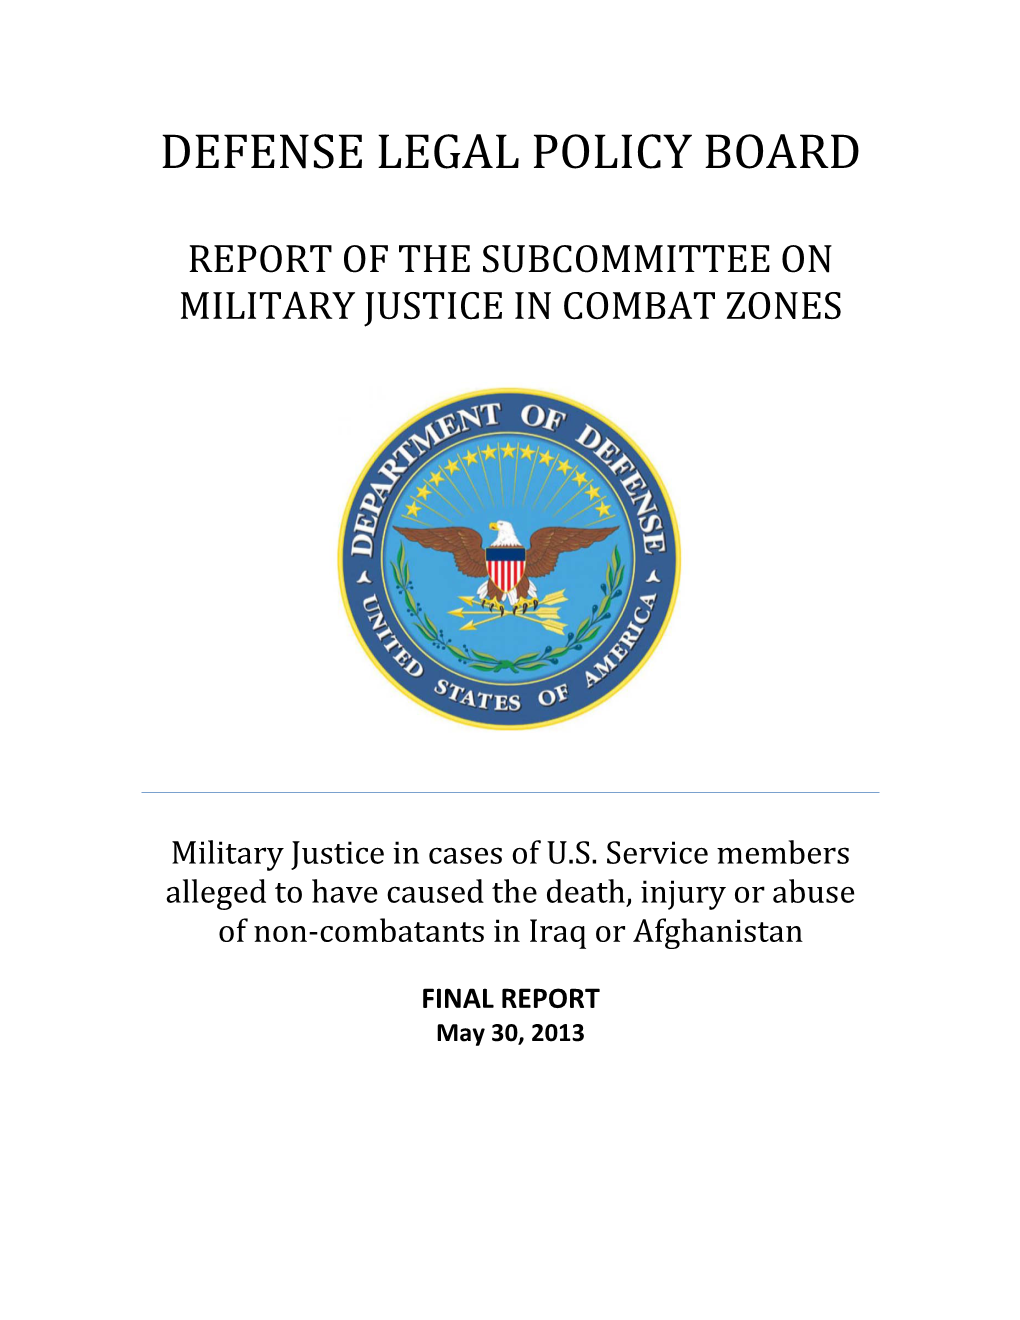 Report of the Subcommittee on Military Justice in Combat Zones